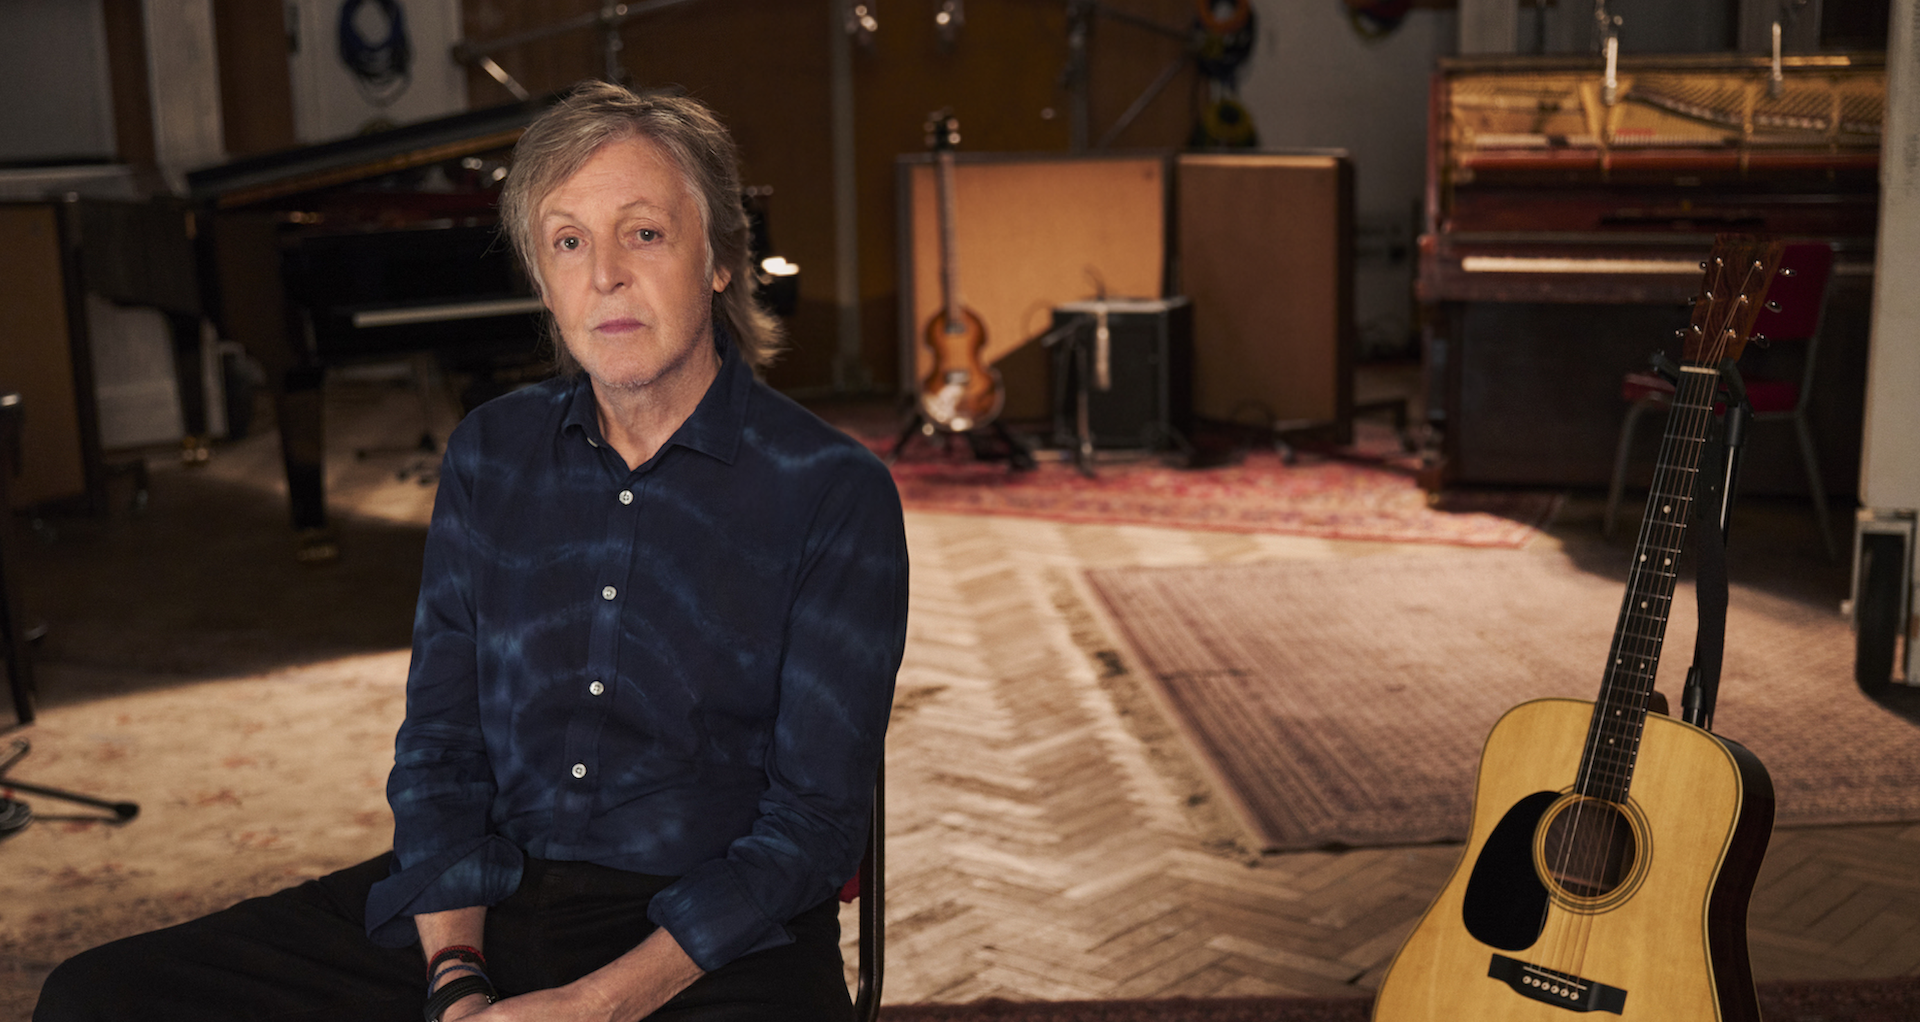 Mary McCartney jumpstarts her directorial debut with the Disney documentary titled 'If These Walls Could Sing,' detailing the history of Abbey Road Studios.